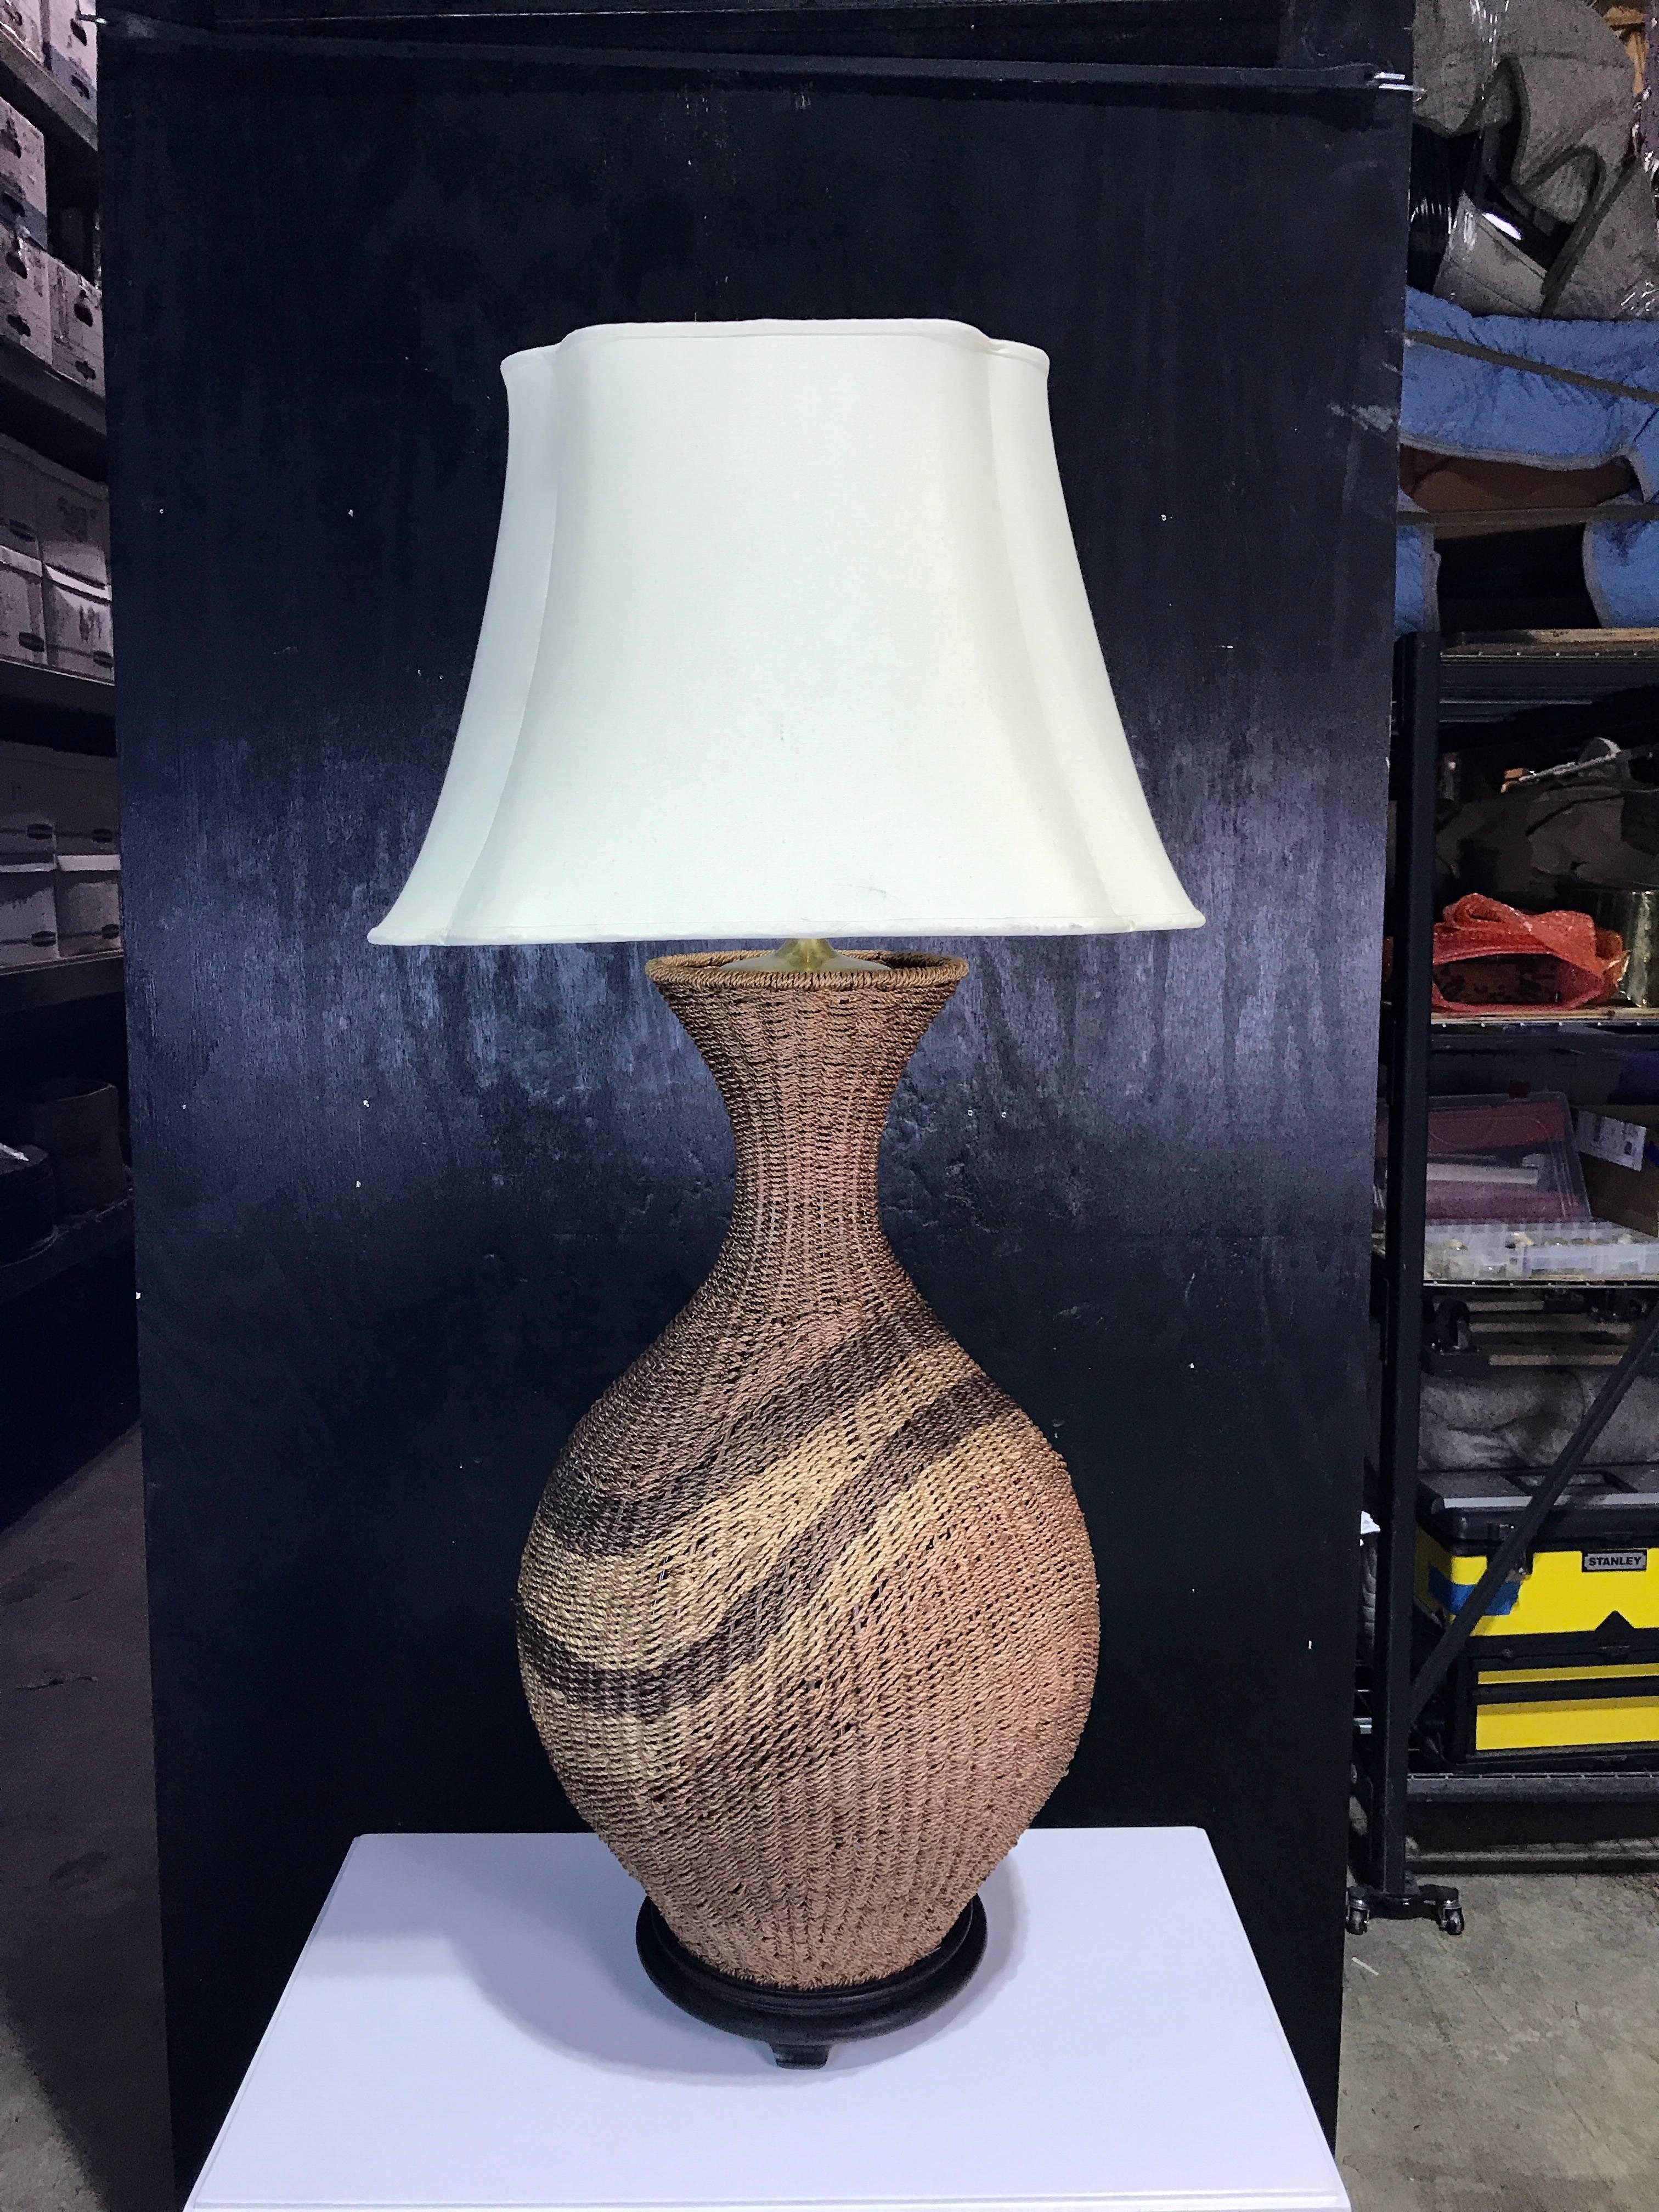 Huge mod polychromed rattan patterned lamp, new wiring.
Raised on an 11